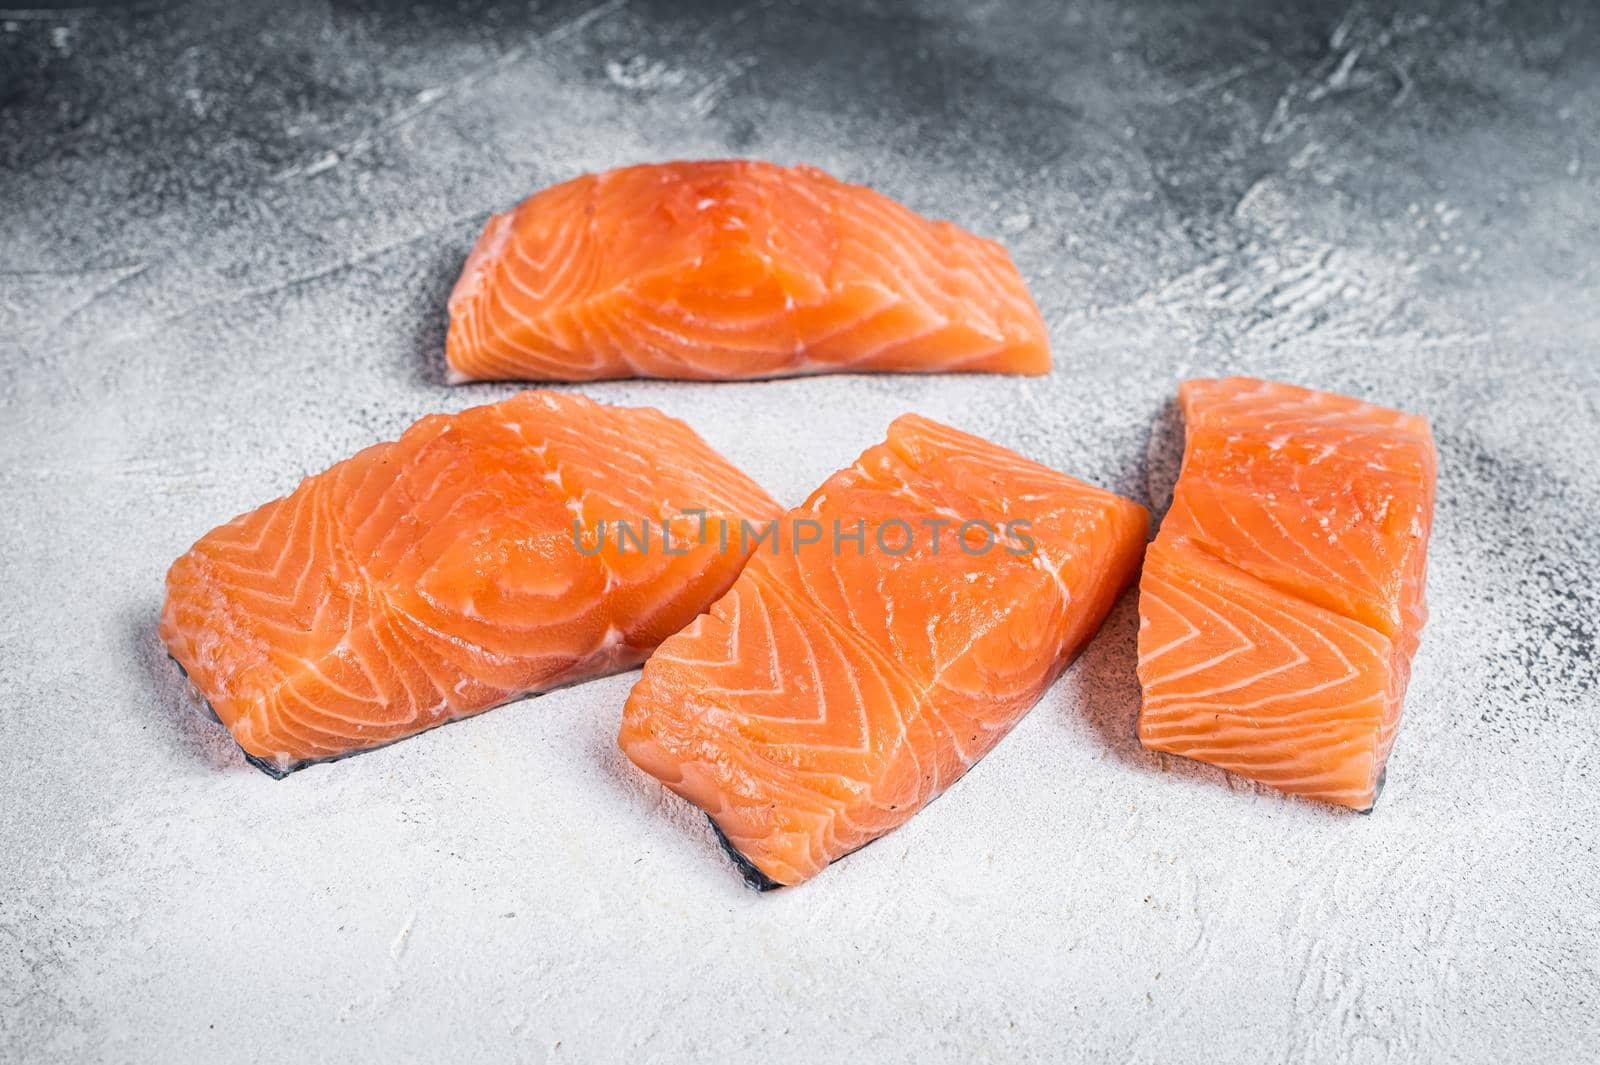 Raw salmon fillet steak on kitchen table. White background. Top view by Composter